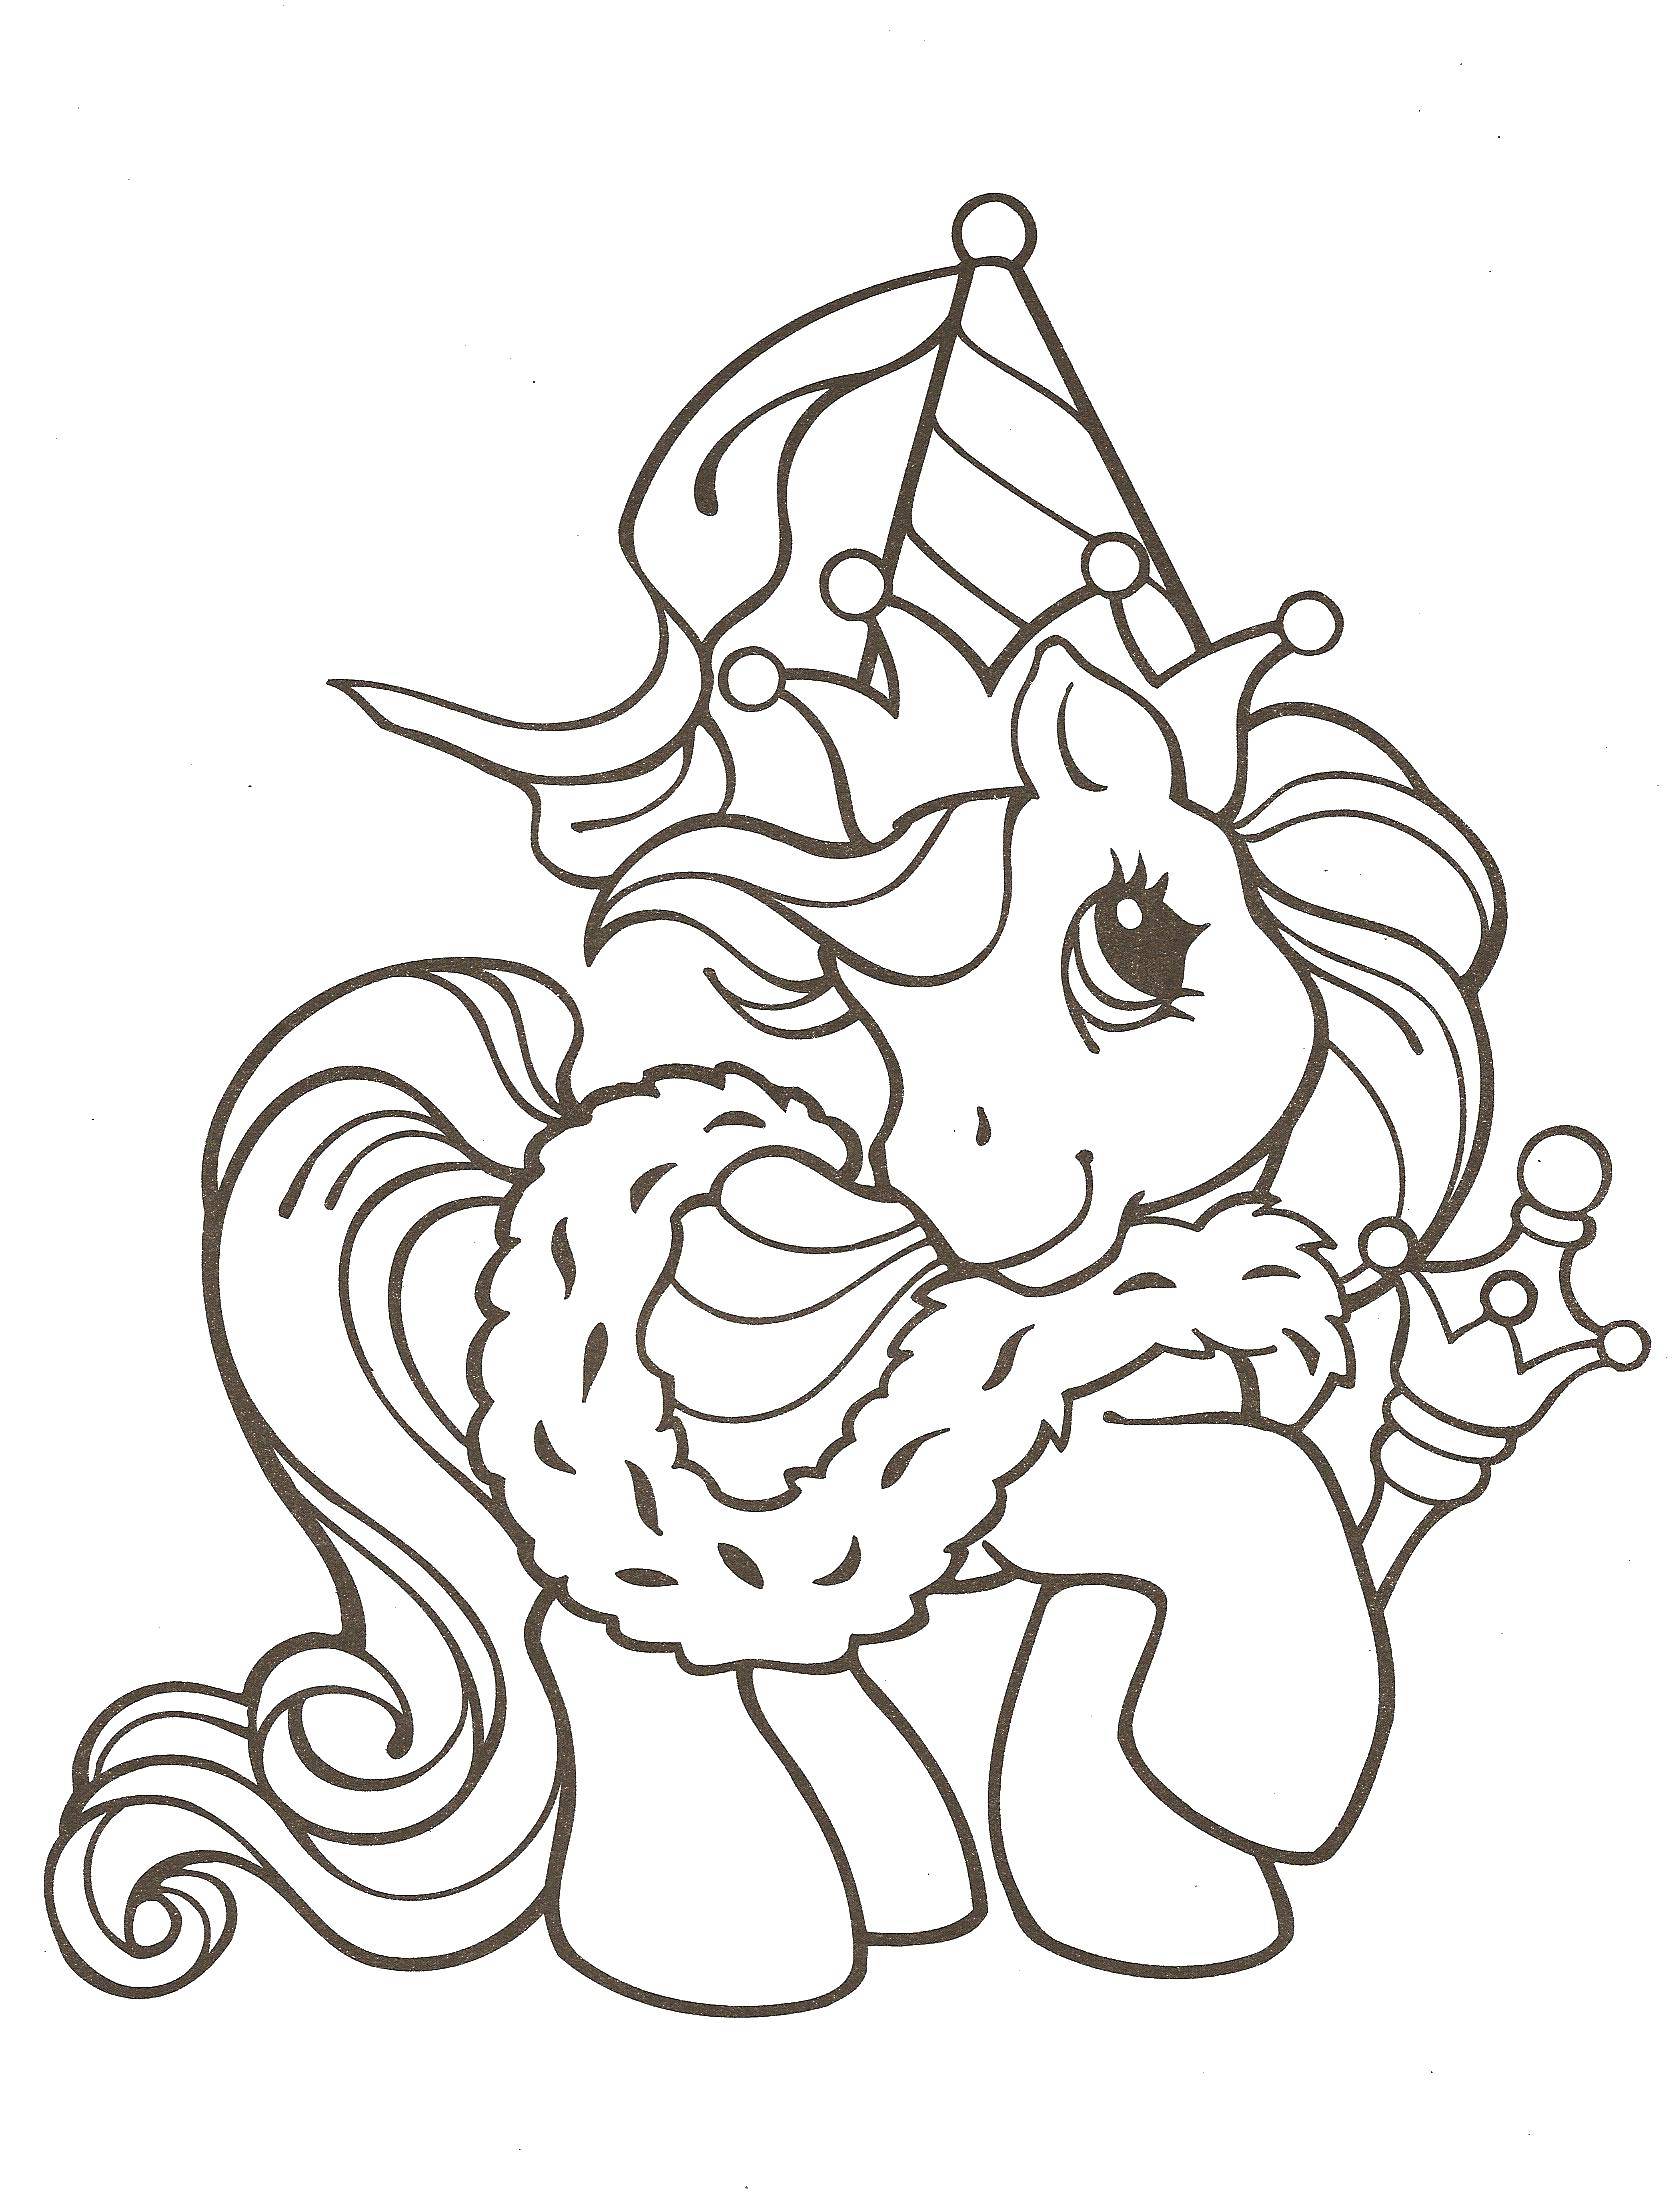 Coloring Pony Queen. Category Ponies. Tags:  pony, king.